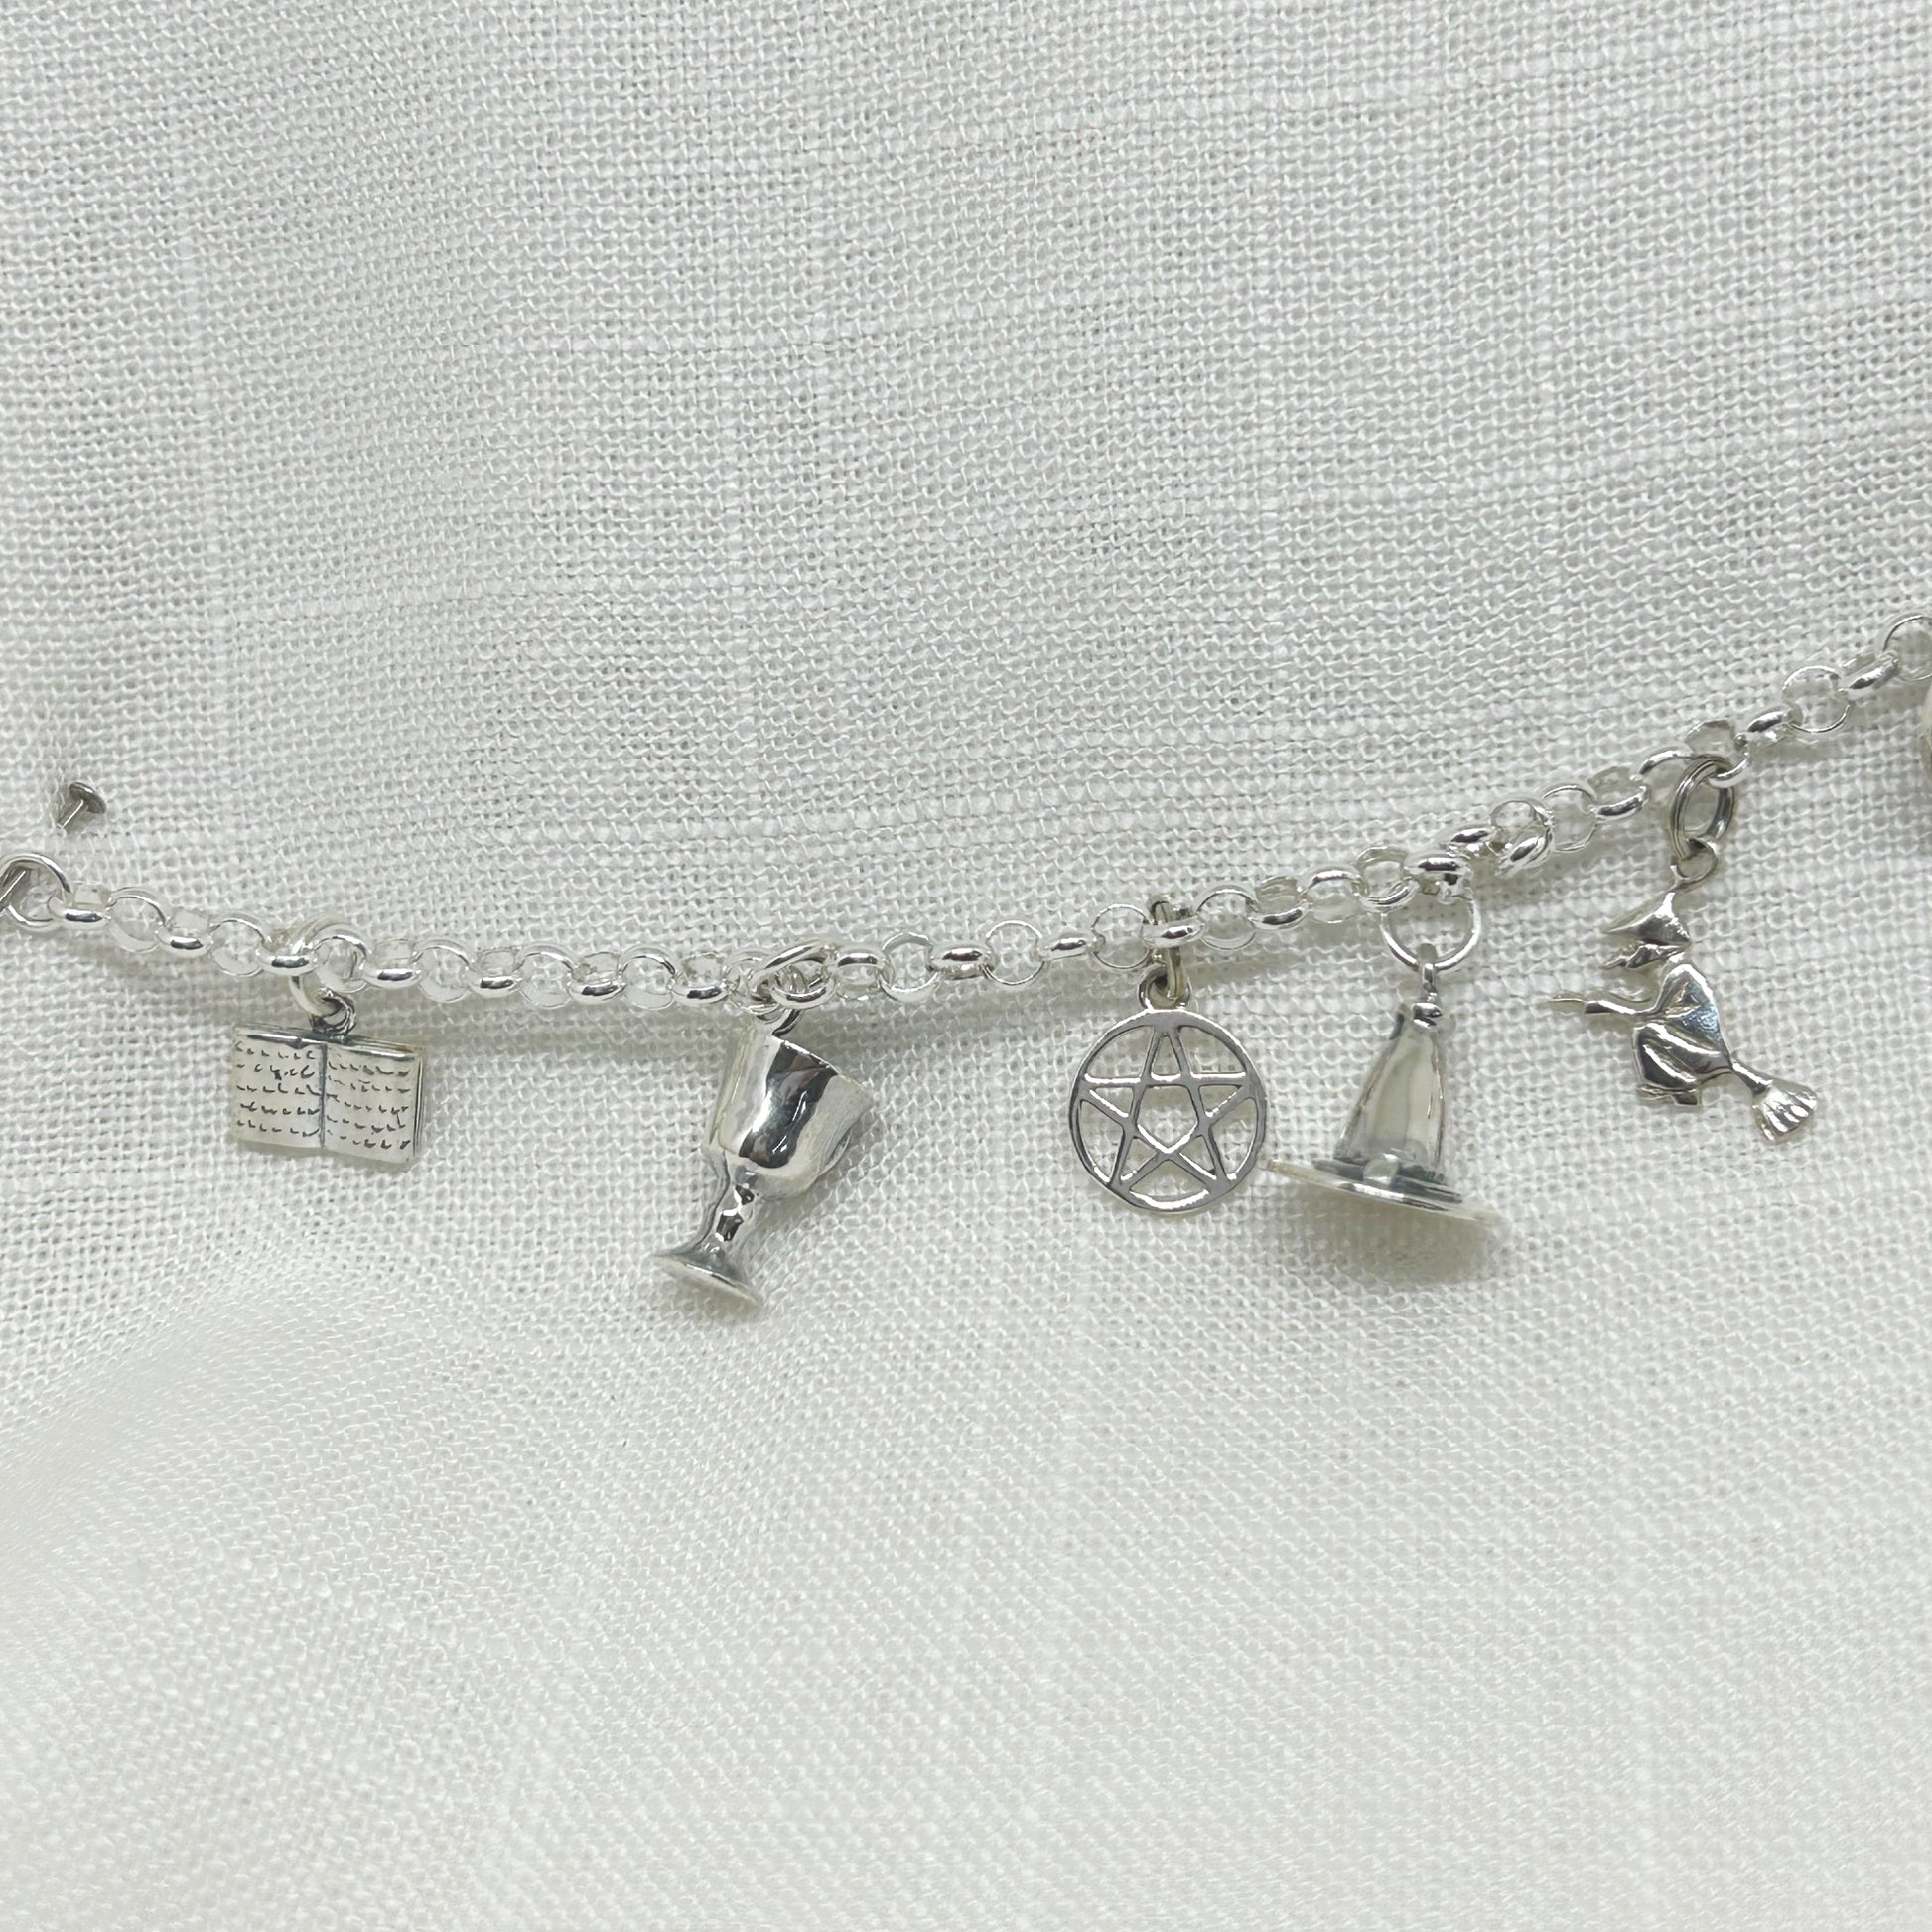 Witchy Charm Bracelet BLESSED BE Wiccan Pagan Pentacle Witch